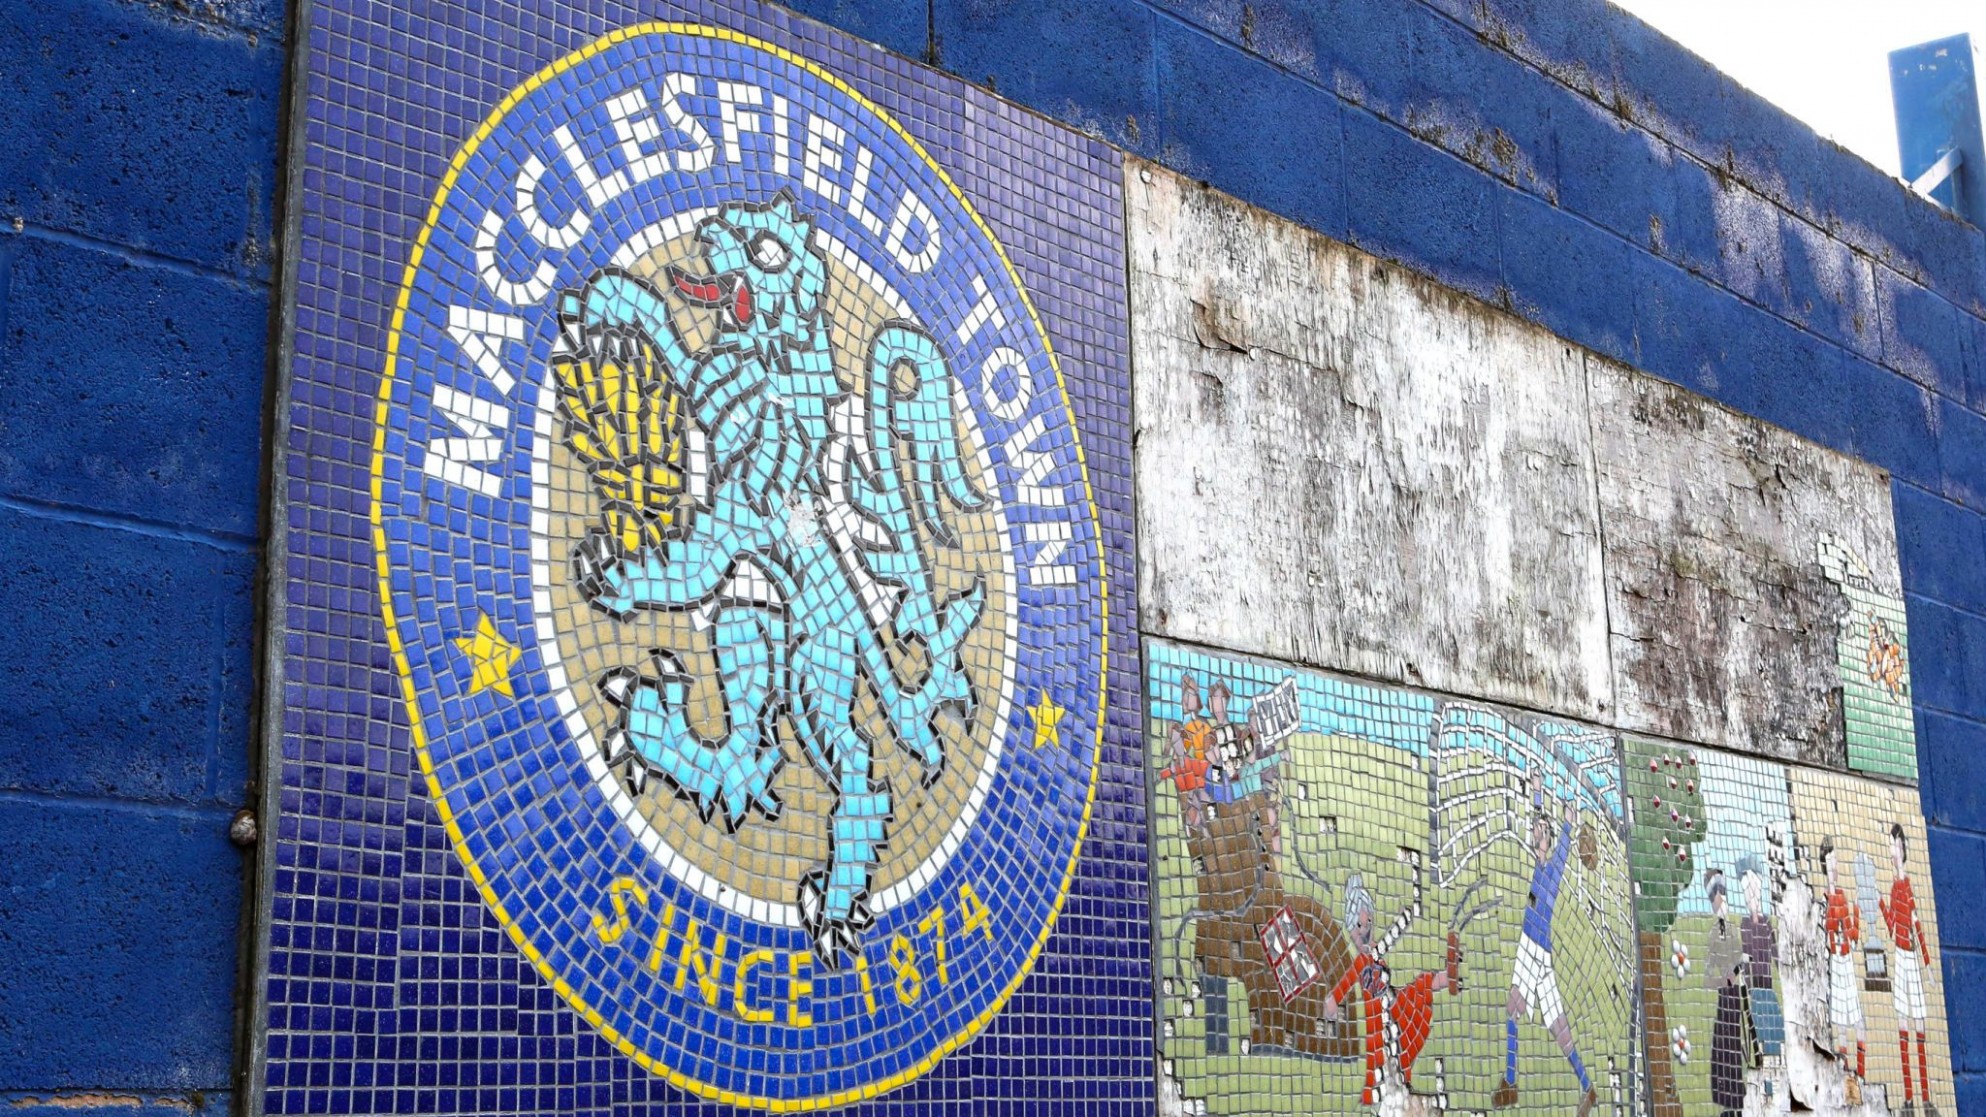 Macclesfield Players And Staff Not Paid Wages For February ..